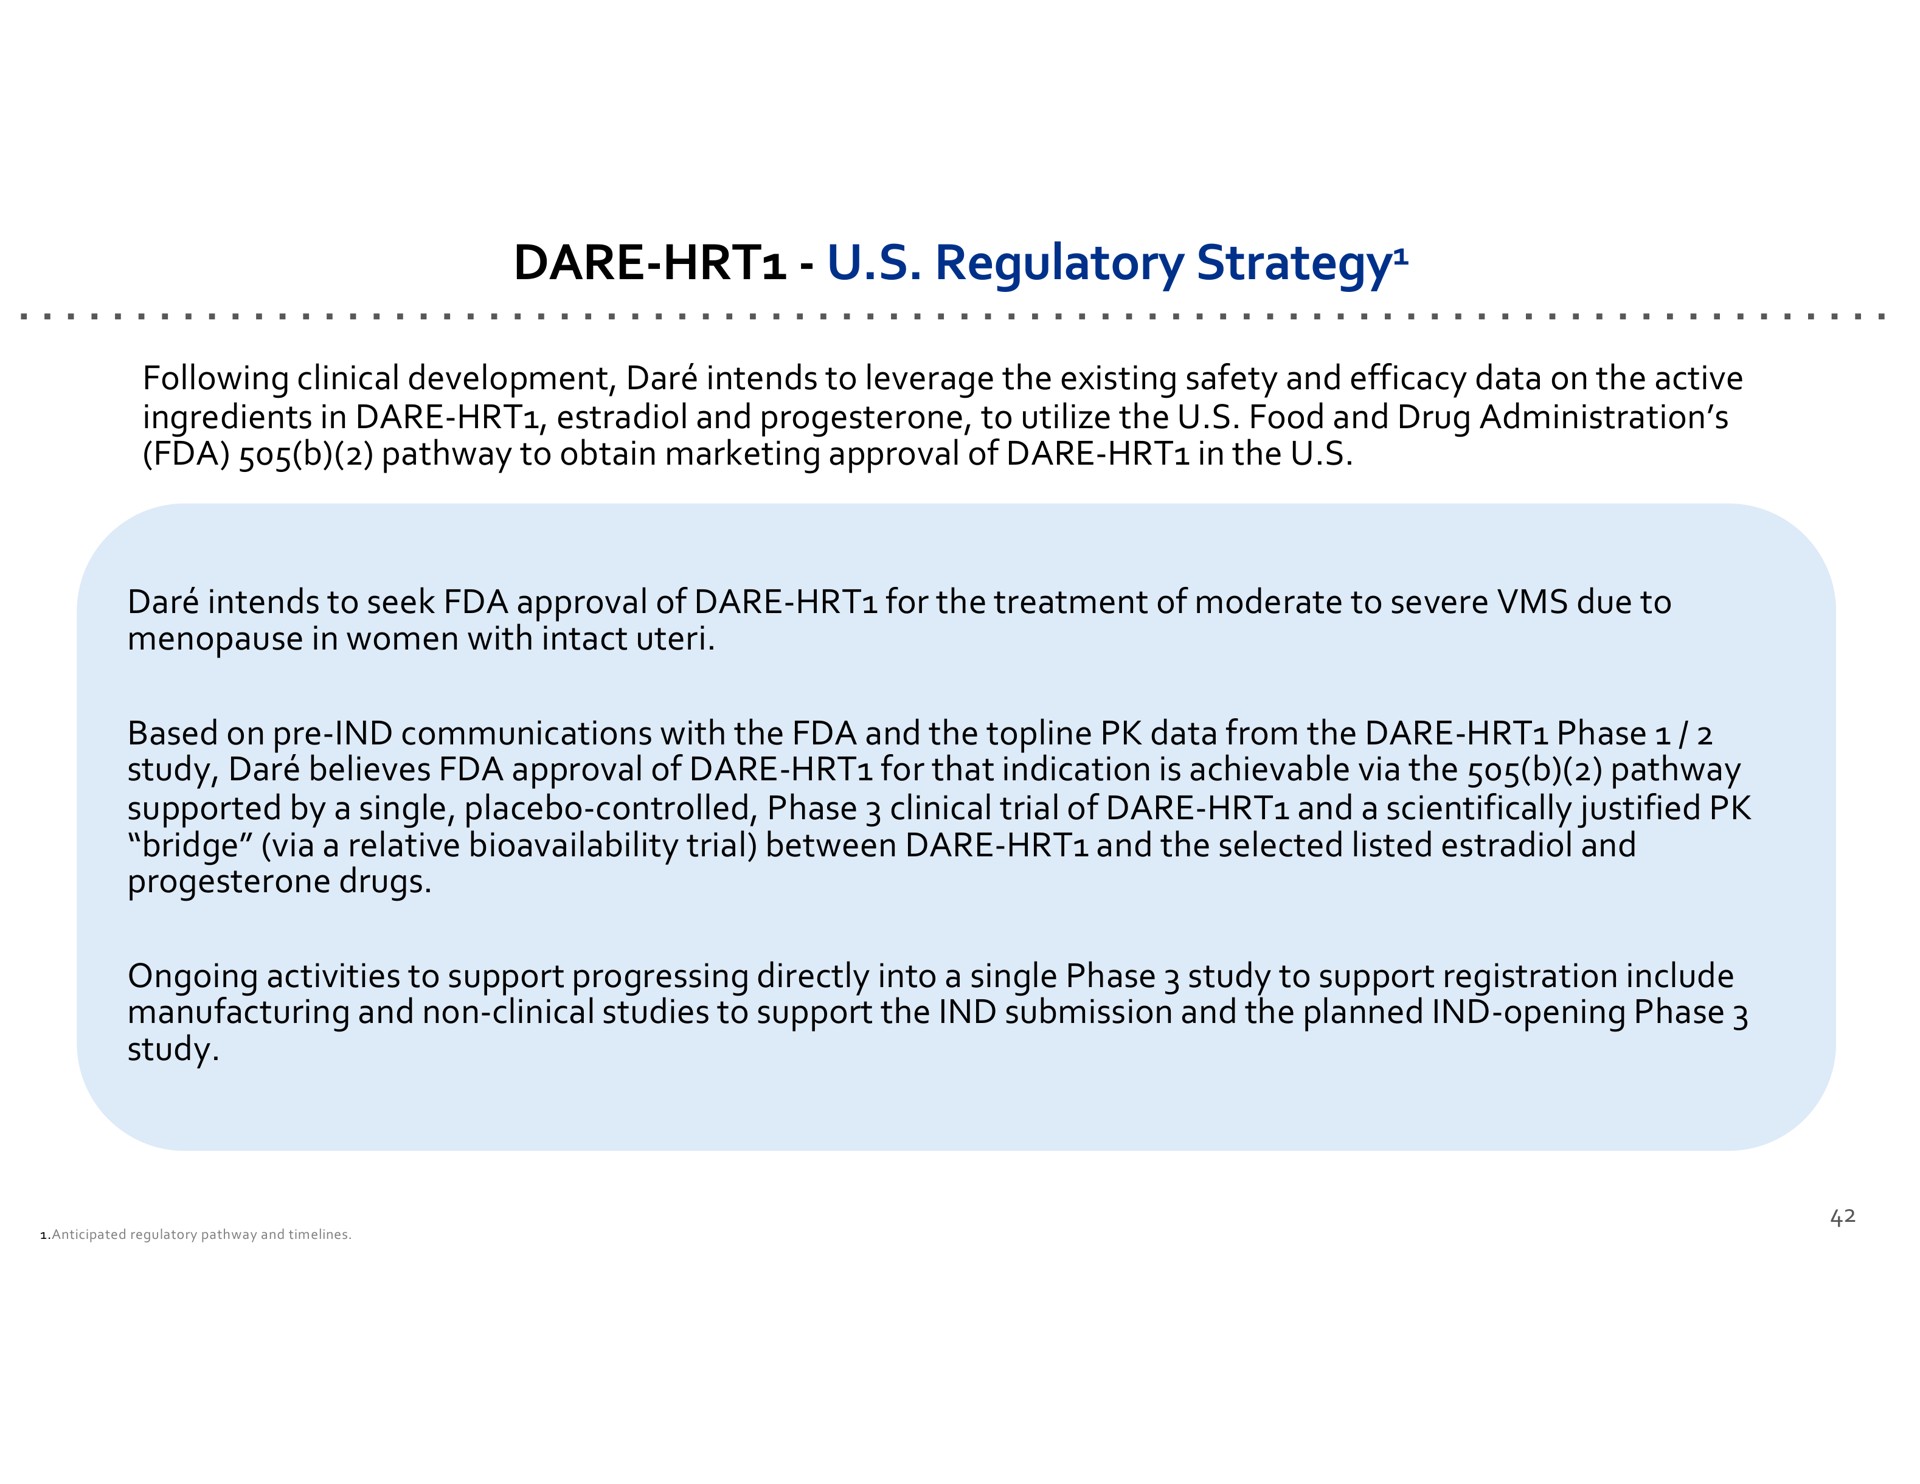 dare regulatory strategy following clinical development dar intends to leverage the existing safety and efficacy data on the active ingredients in dare estradiol and progesterone to utilize the food and drug administration pathway to obtain marketing approval of dare in the dar intends to seek approval of dare for the treatment of moderate to severe due to menopause in women with intact uteri based on communications with the and the topline data from the dare phase study dar believes approval of dare for that indication is achievable via the pathway supported by a single placebo controlled phase clinical trial of dare and a scientifically justified bridge via a relative trial between dare and the selected listed estradiol and progesterone drugs ongoing activities to support progressing directly into a single phase study to support registration include manufacturing and non clinical studies to support the submission and the planned opening phase study dare strategy | Dare Bioscience